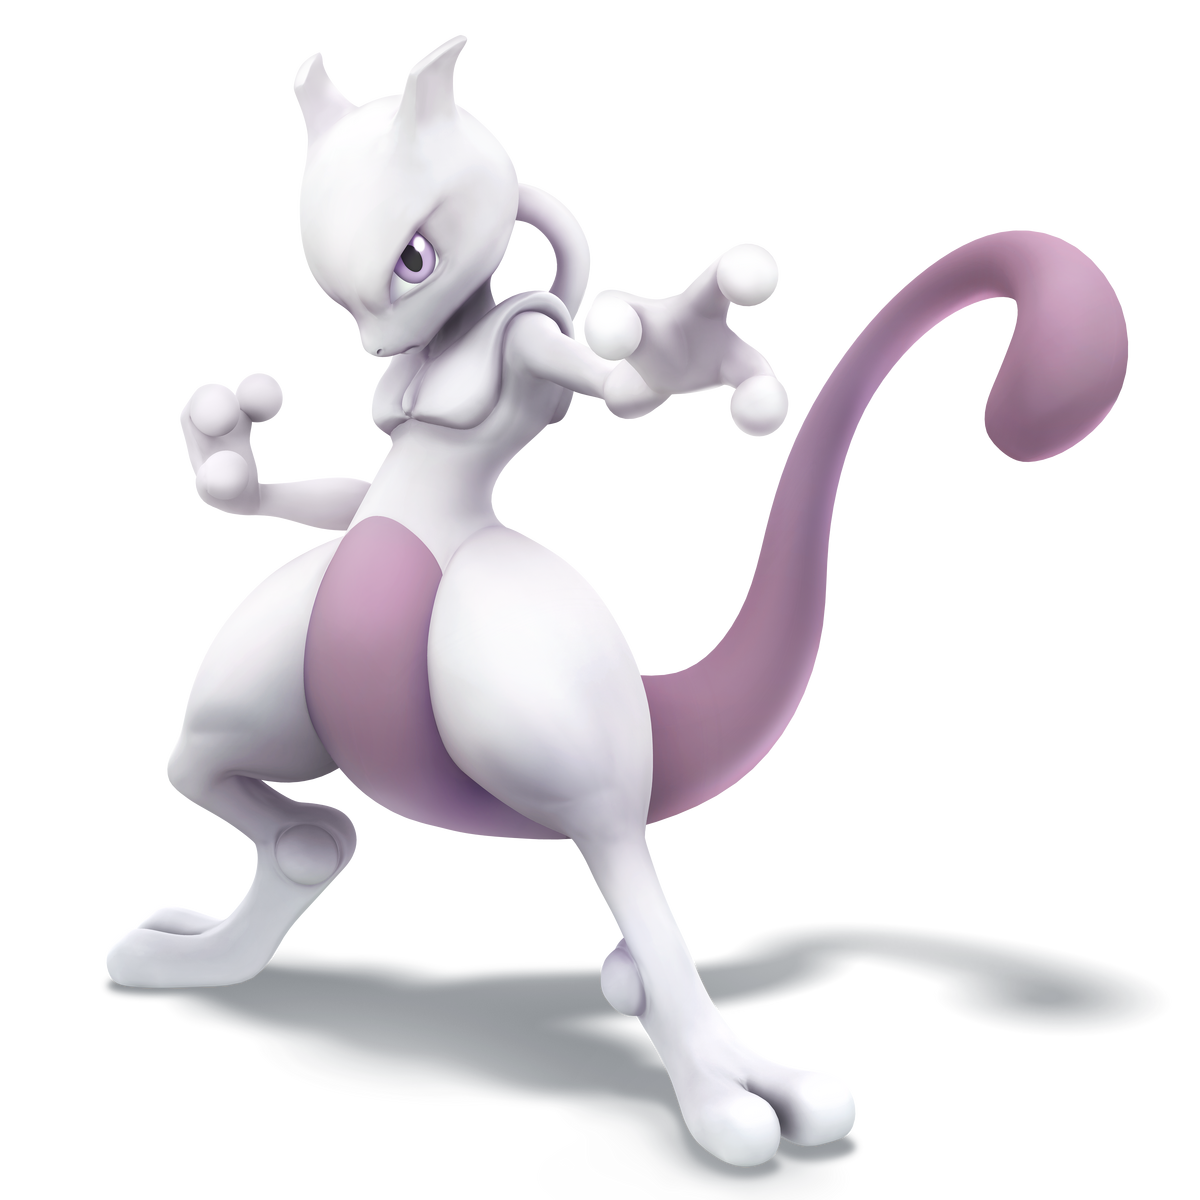 Mewtwo, Videogame Villiains and Bosses Wiki